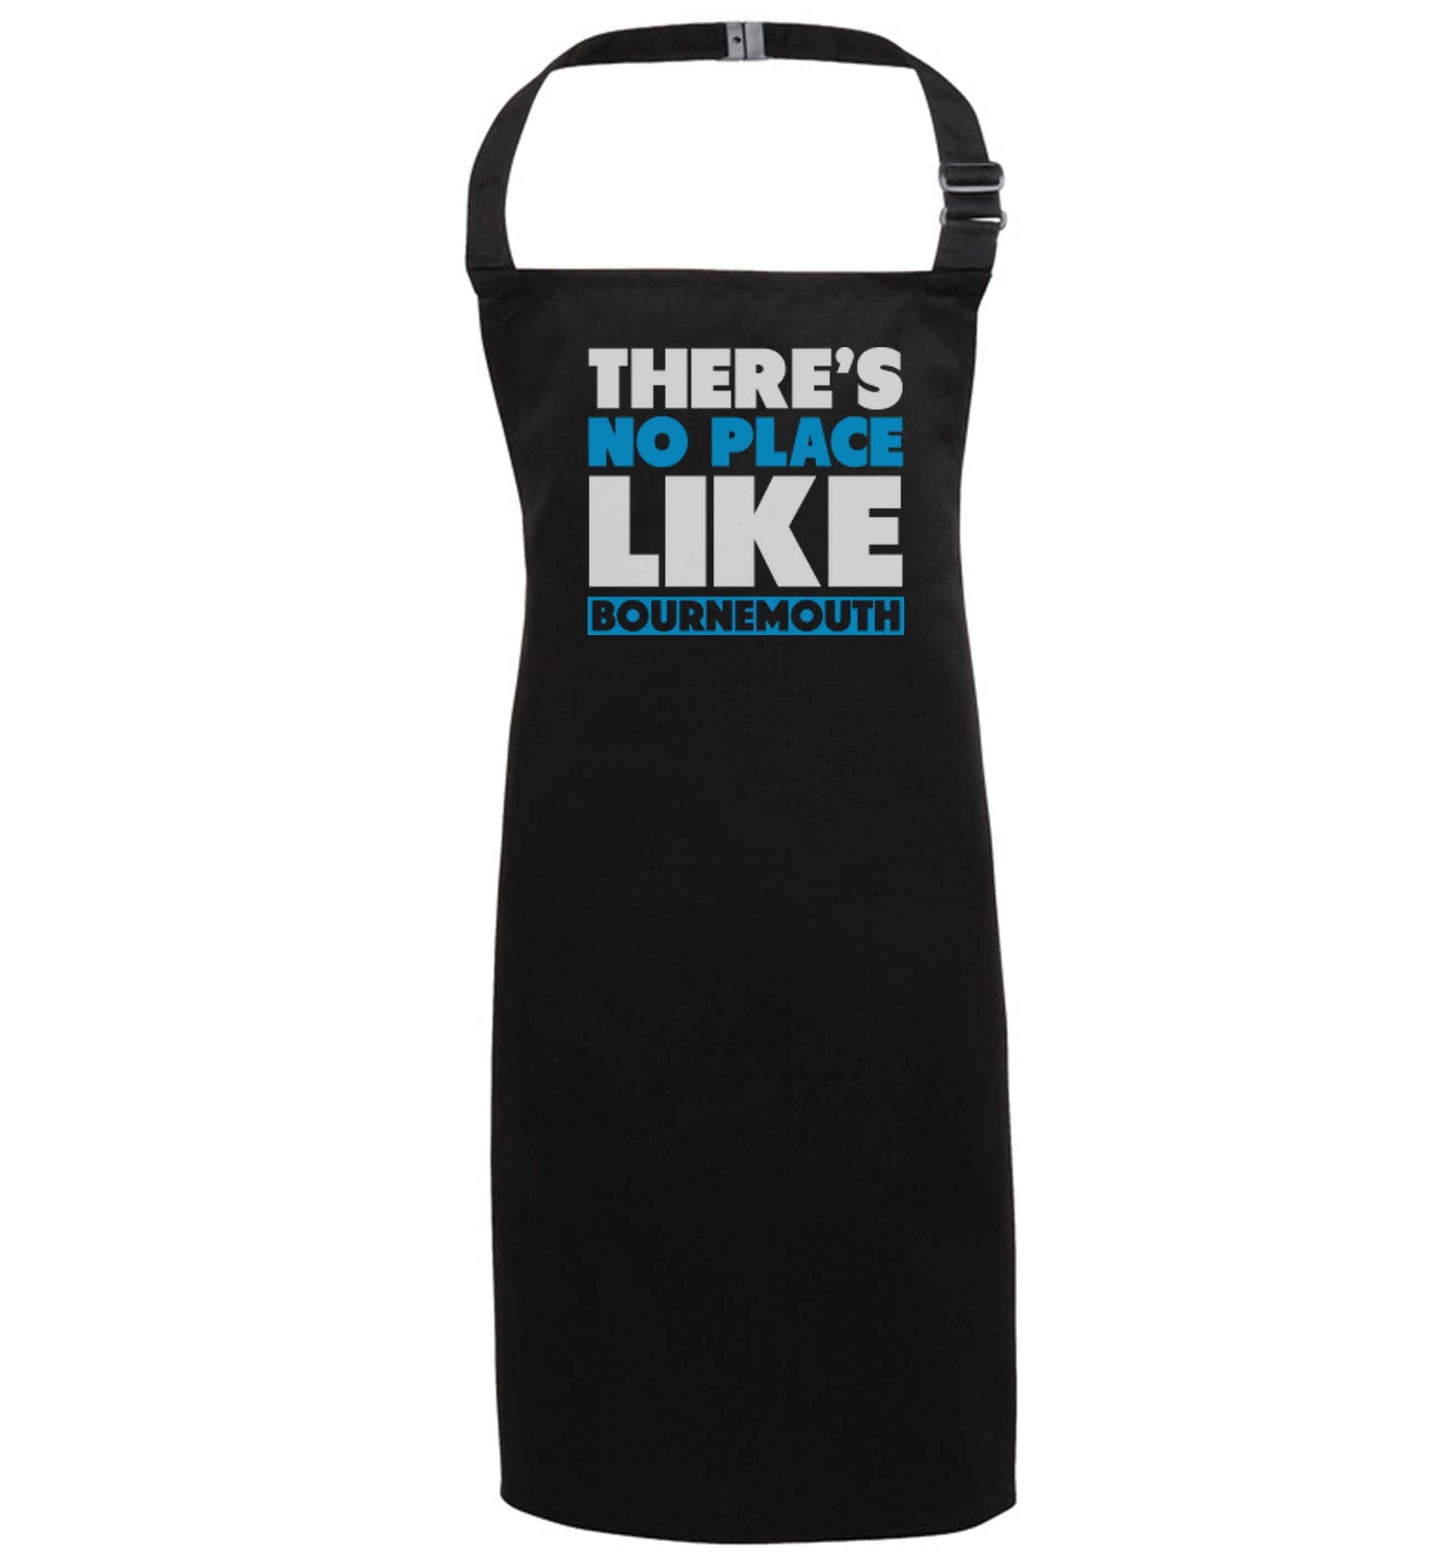 There's no place like Bournemouth black apron 7-10 years